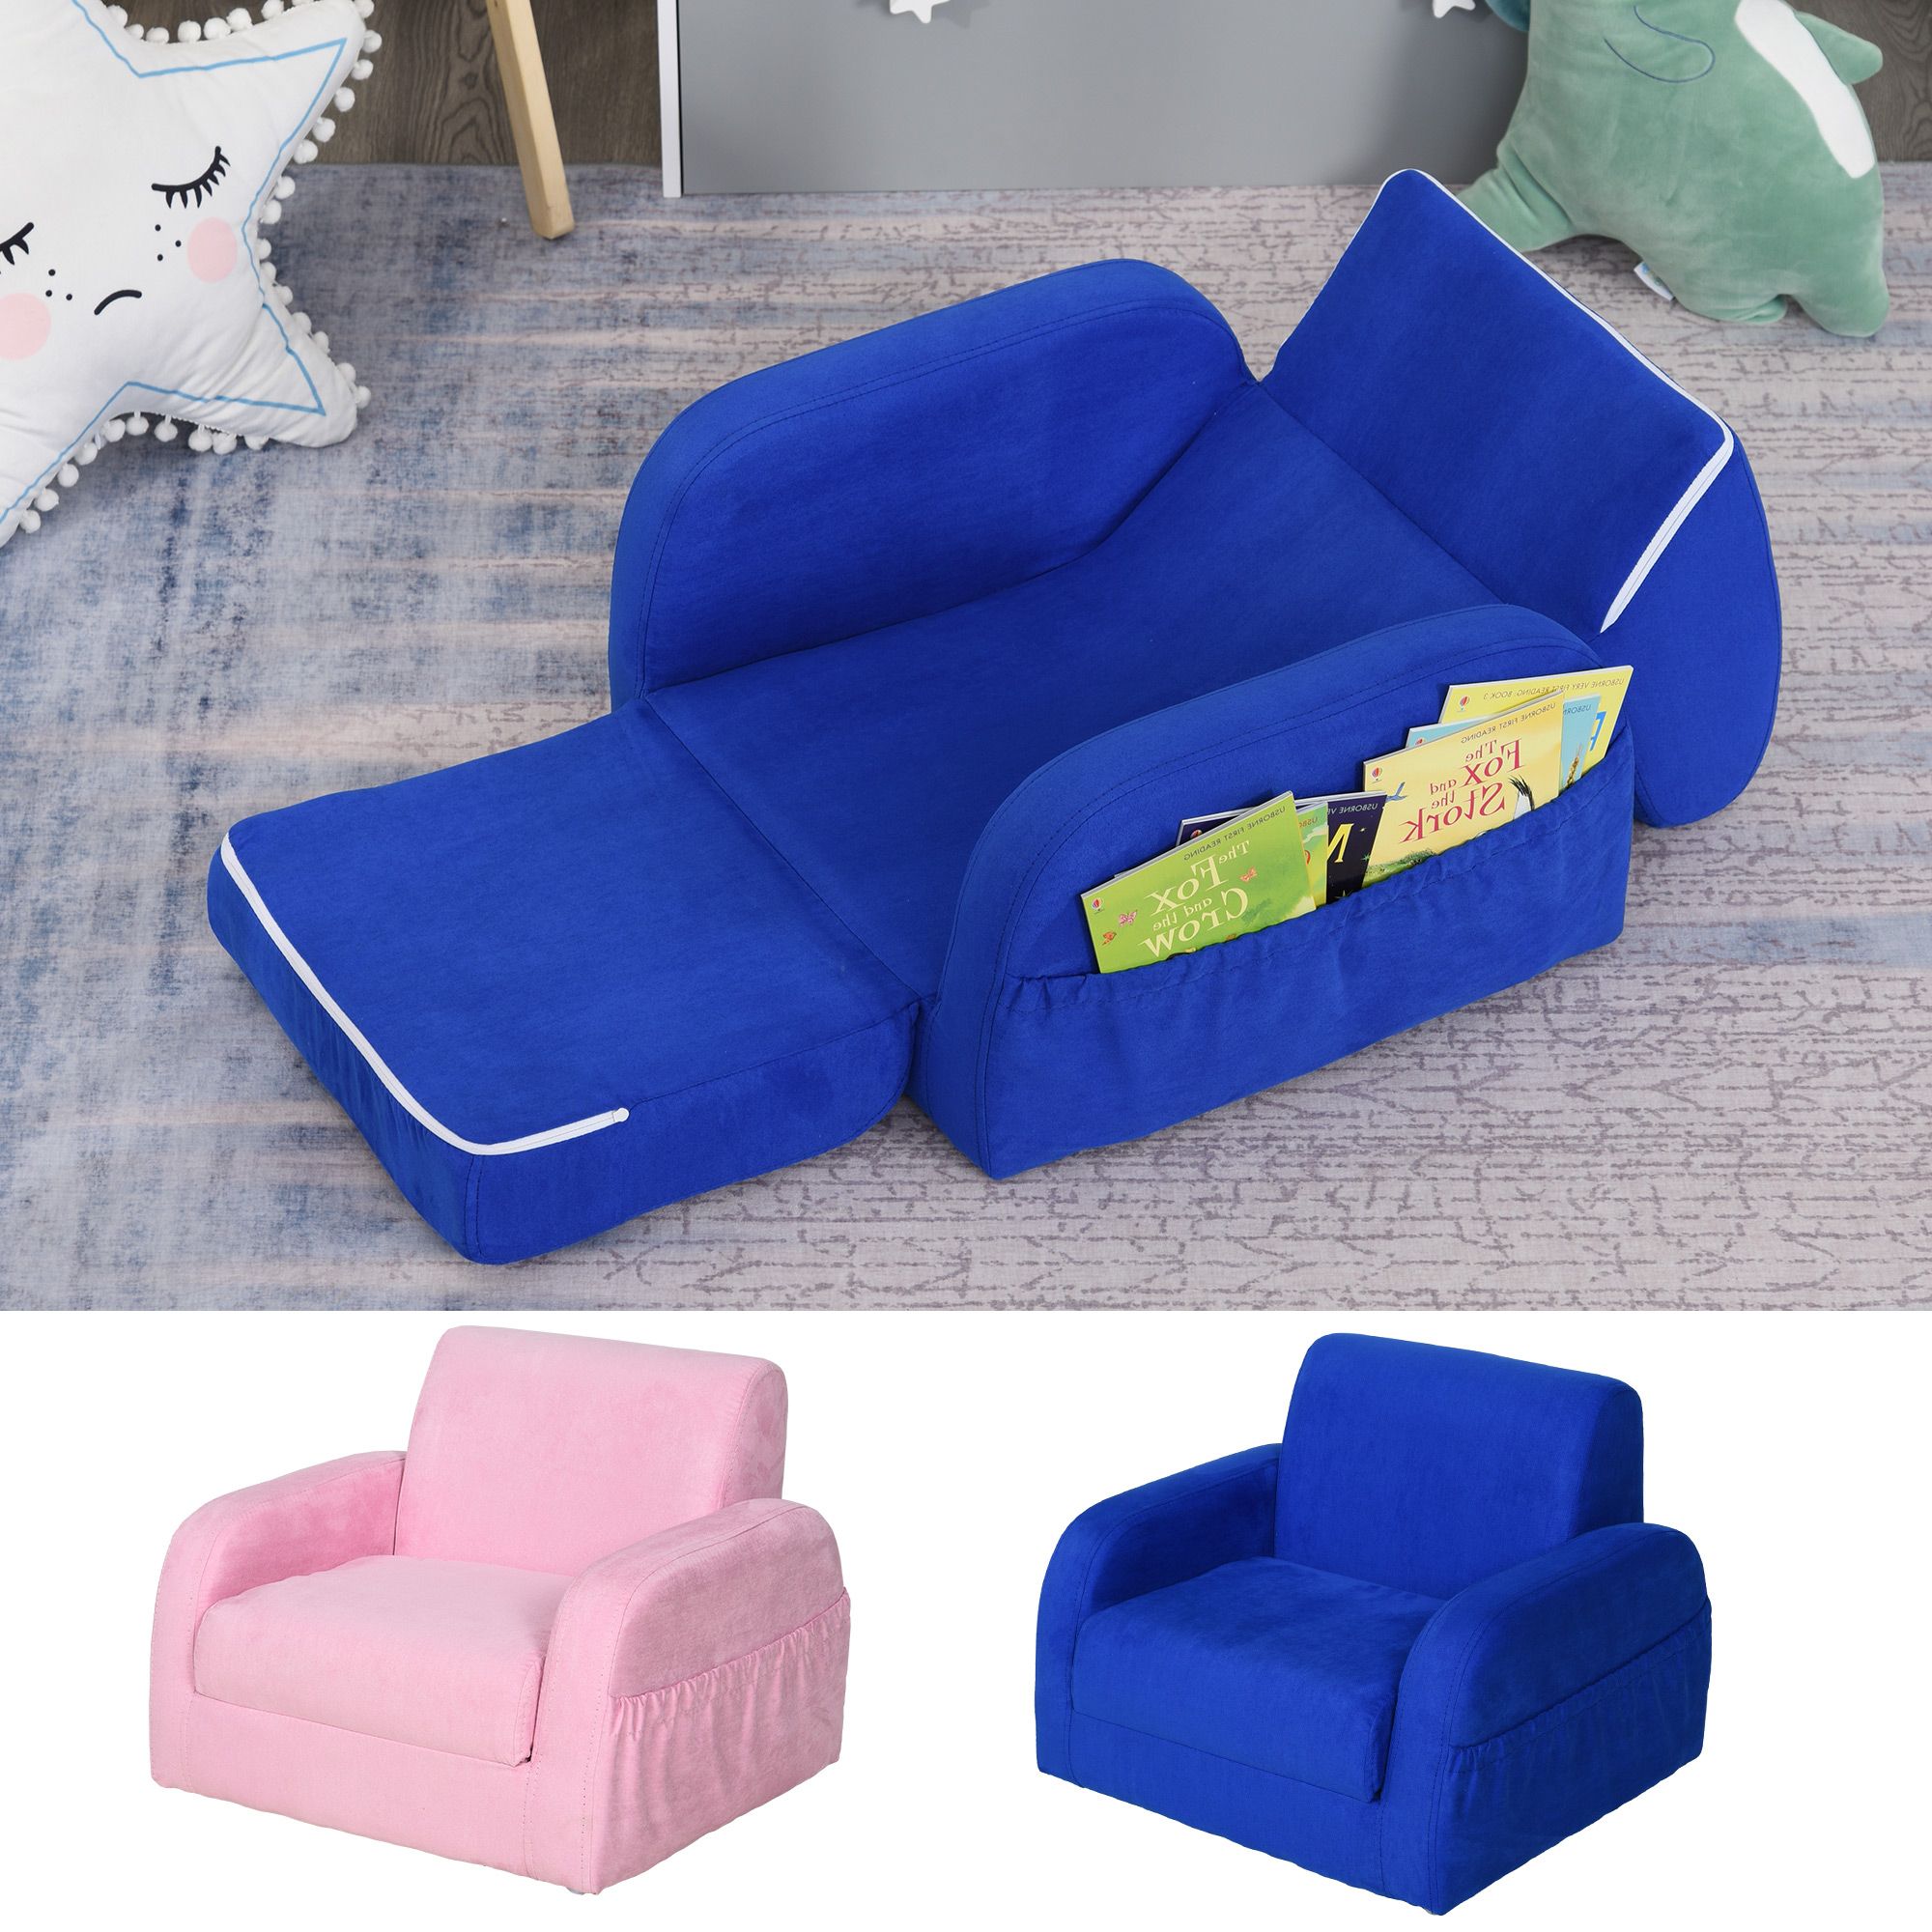 2 In 1 Kids Sofa Armchair Chair Fold Out Flip Open Baby Bed Couch Inside Children's Sofa Beds (Gallery 2 of 20)